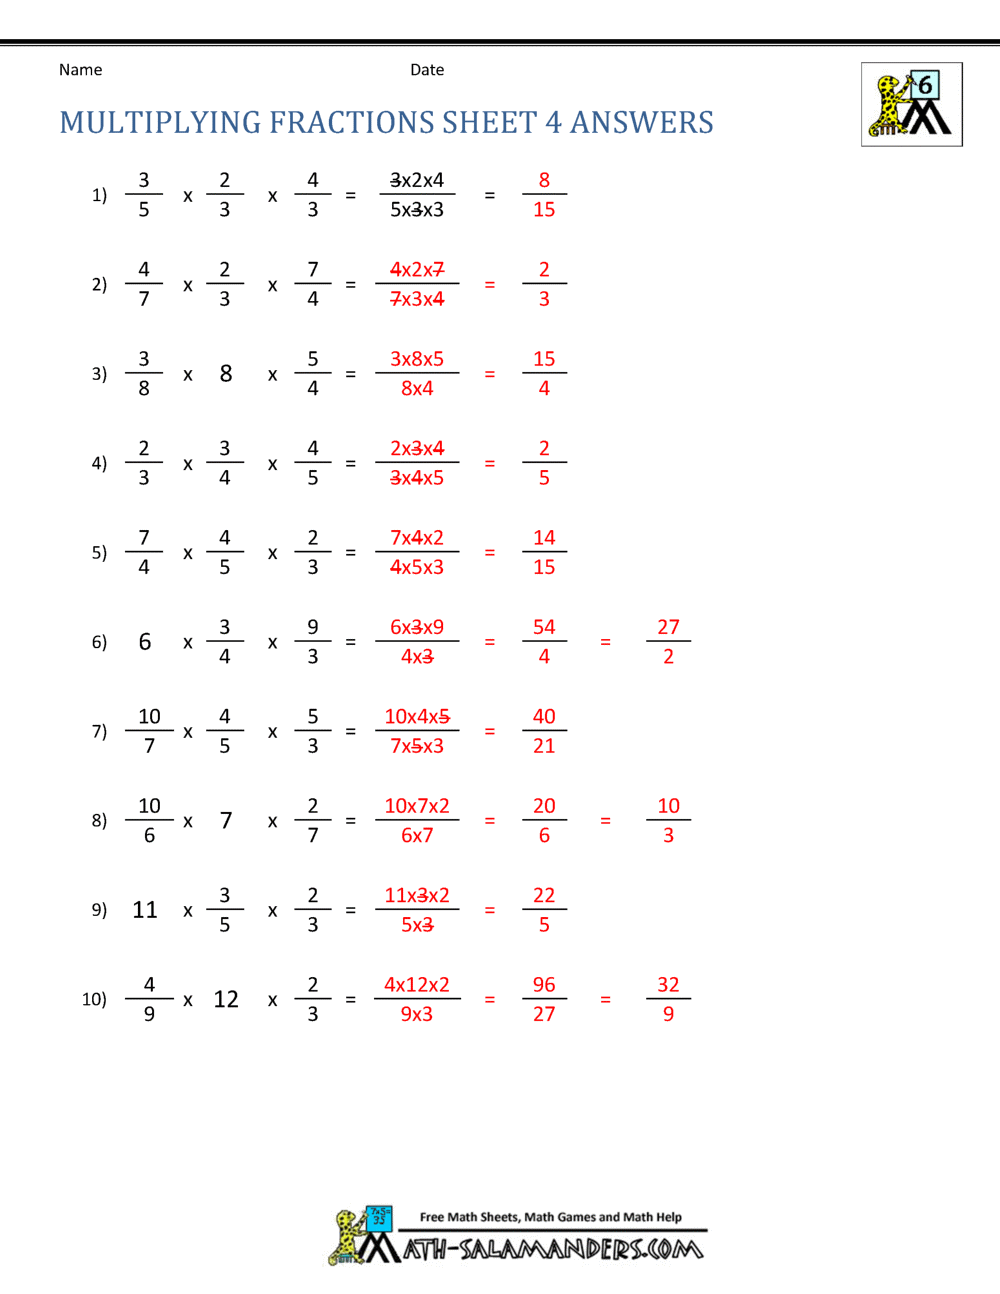 Multiplying Fractions Worksheet With Regard To Multiplying Fractions Area Model Worksheet